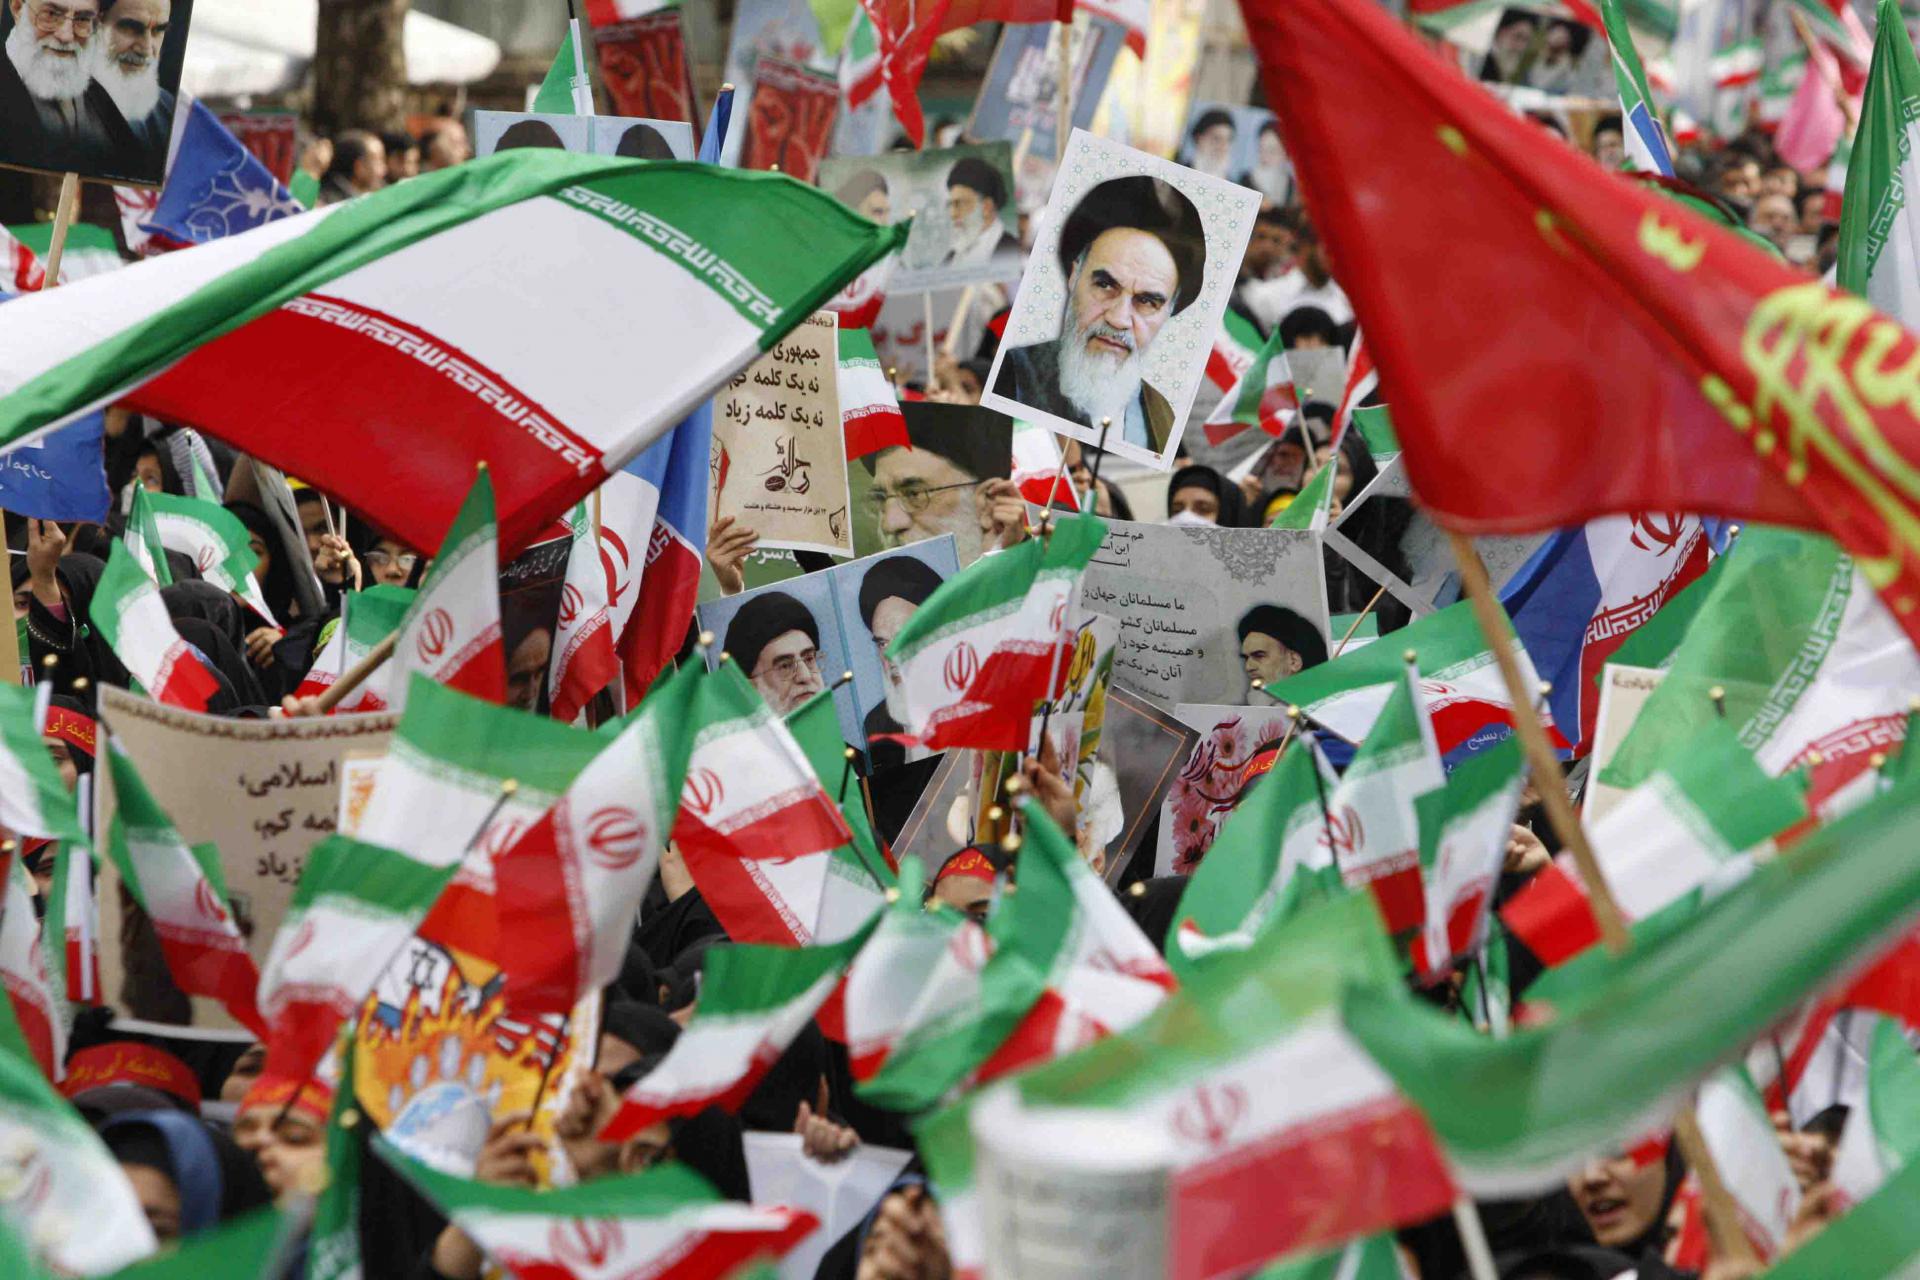 While it strengthened Islamic rule at home in Iran, it left the country cut off from most of the rest of the world.